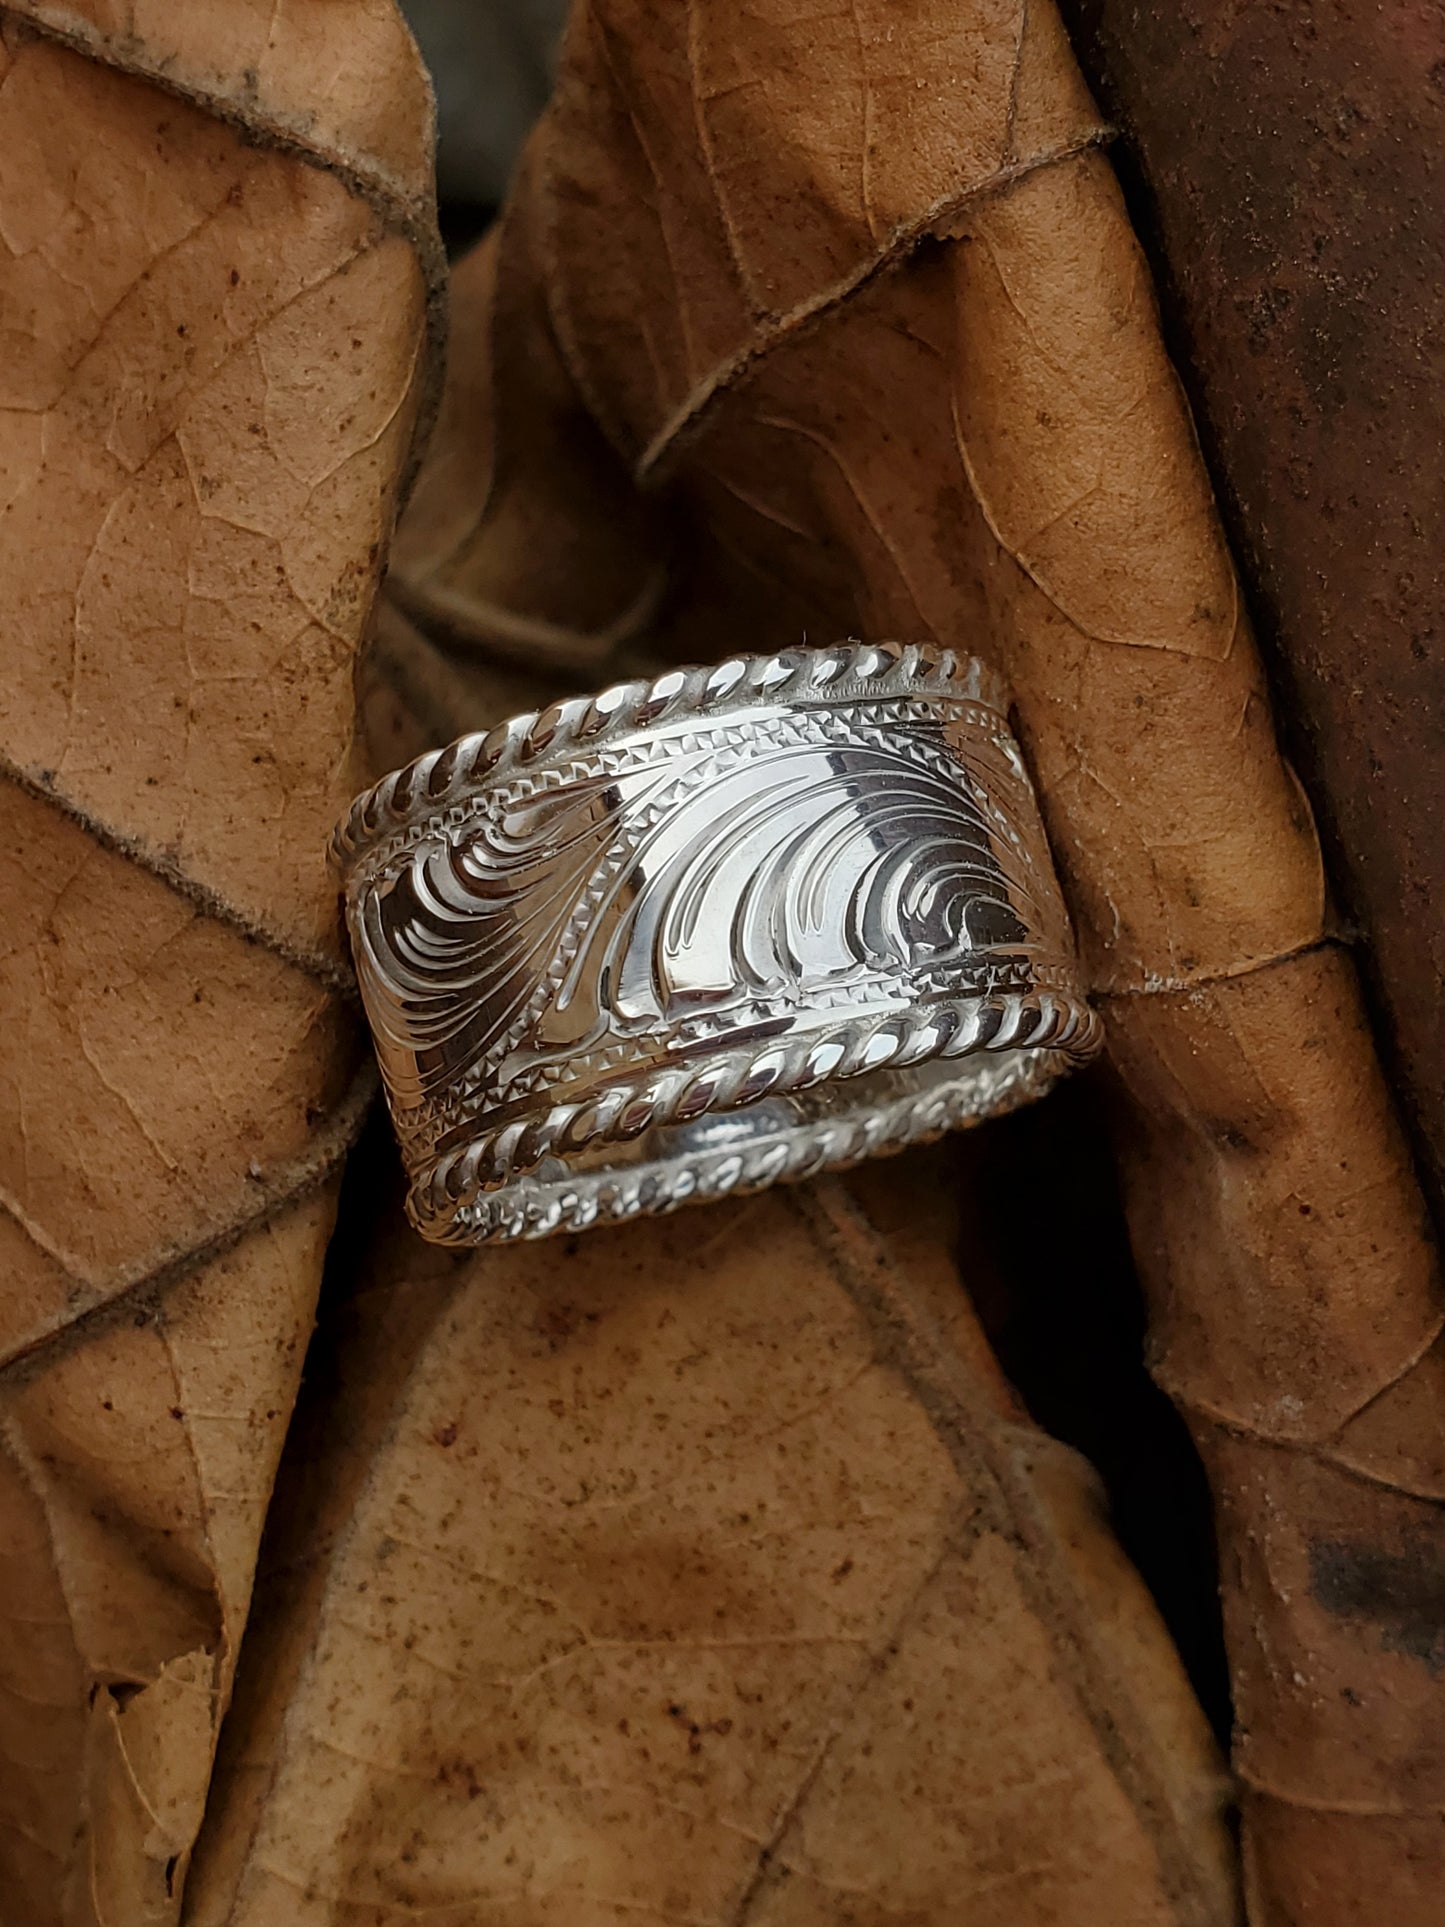 The Lowen: Wide Western Ring with Narrow Rope-Edge, Sterling Silver Western Band, Cowboy Ring, Western Rope Edge Ring